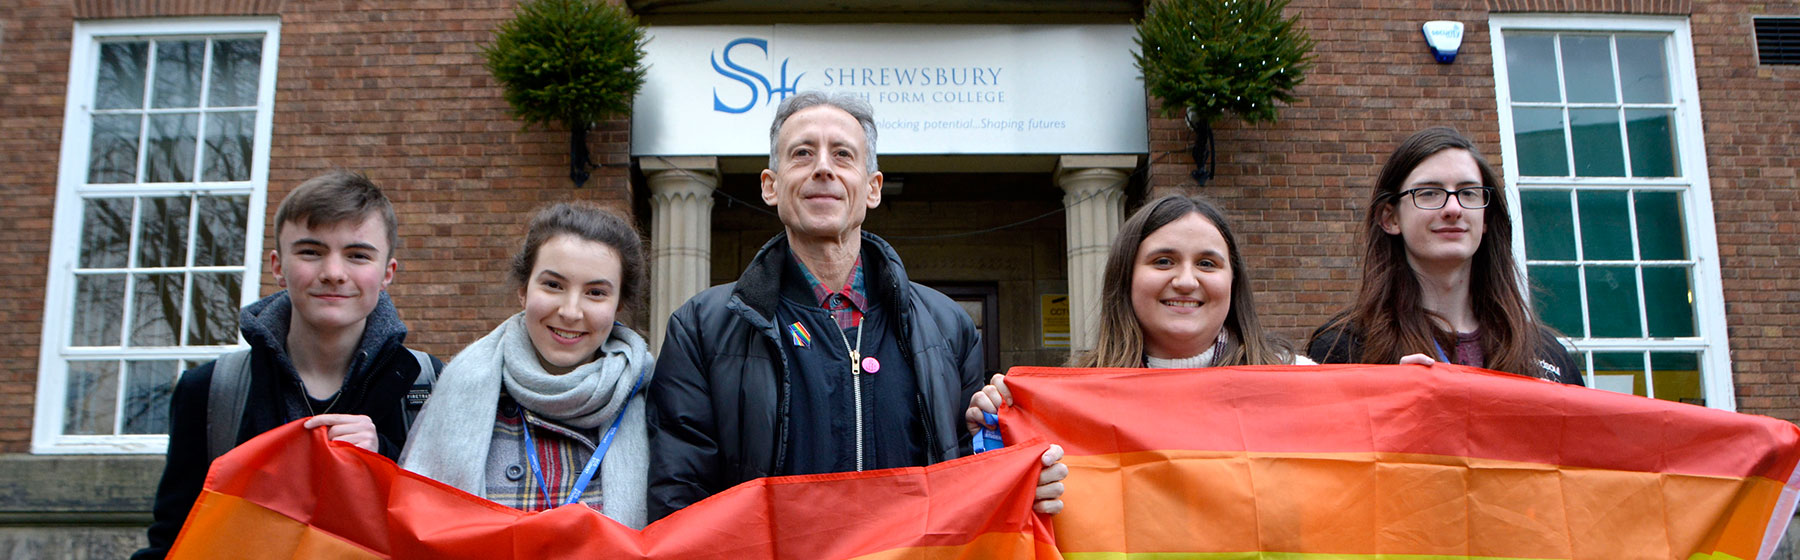 Students and a speaker holding a rainbow flag in the college grounds